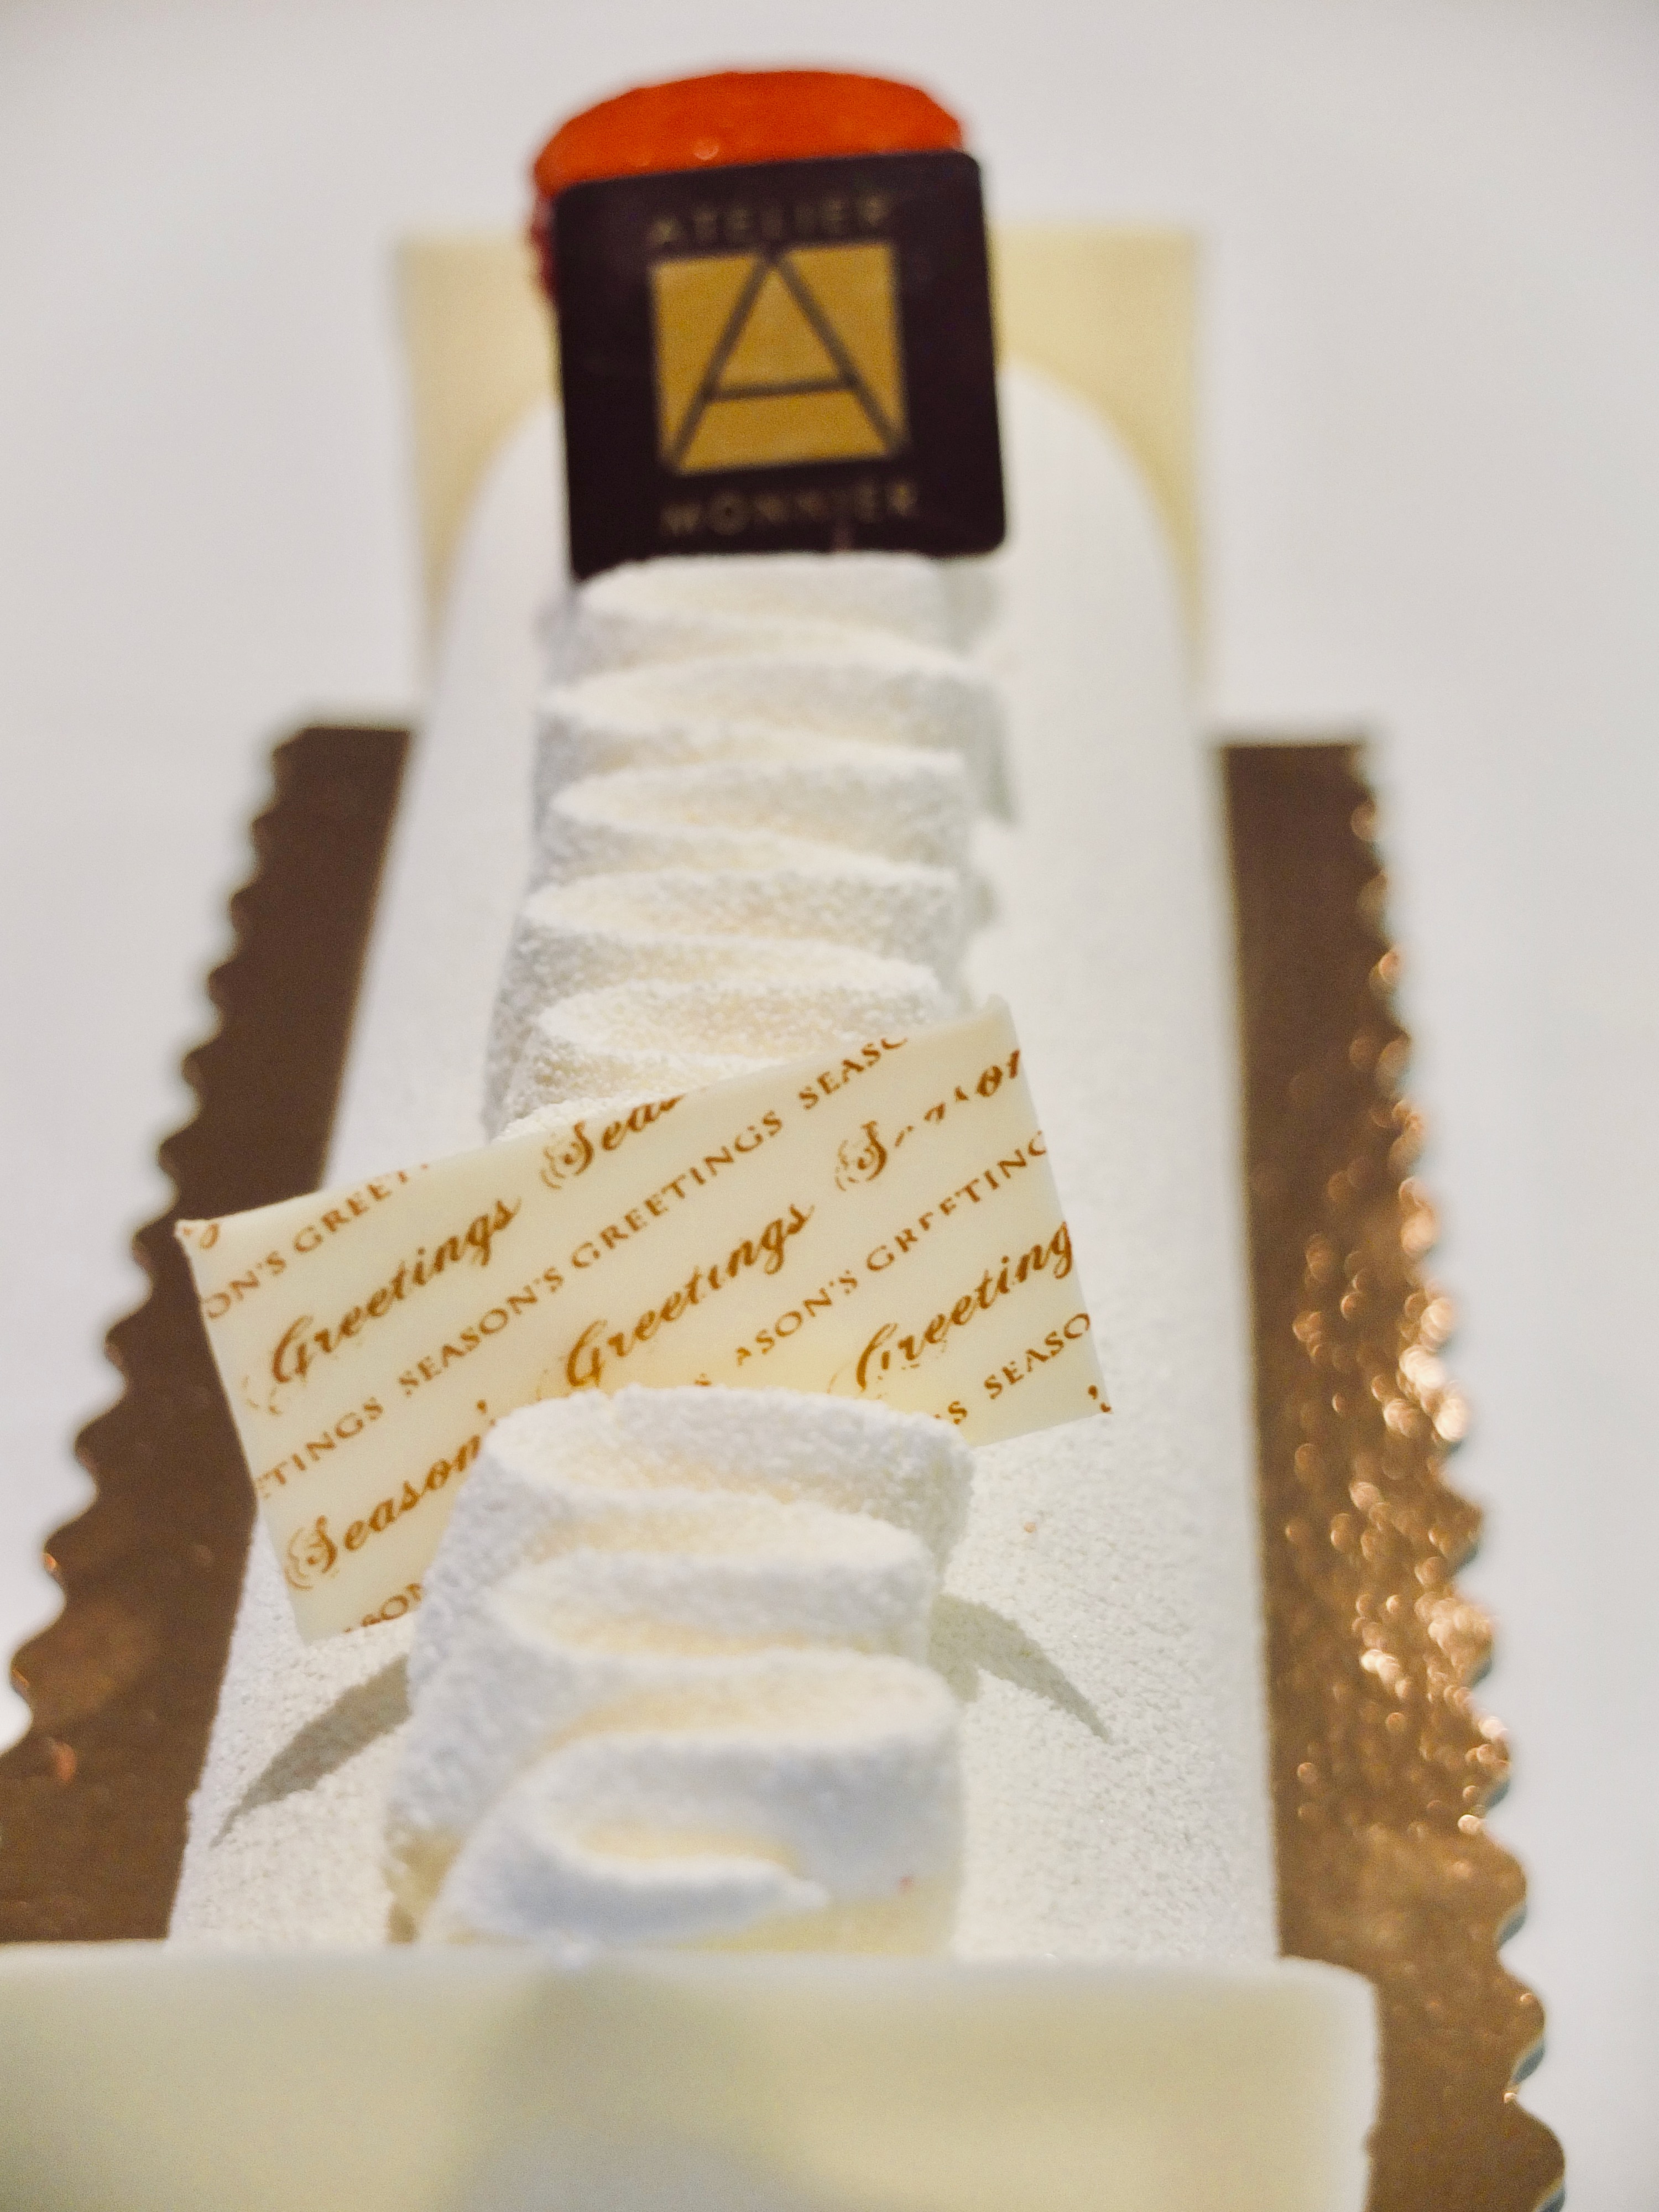 Buche rose de noel Christmas 2019 at Atelier Monnier, french bakery and wine store in Miami - Buches de noel Yule log Champagne